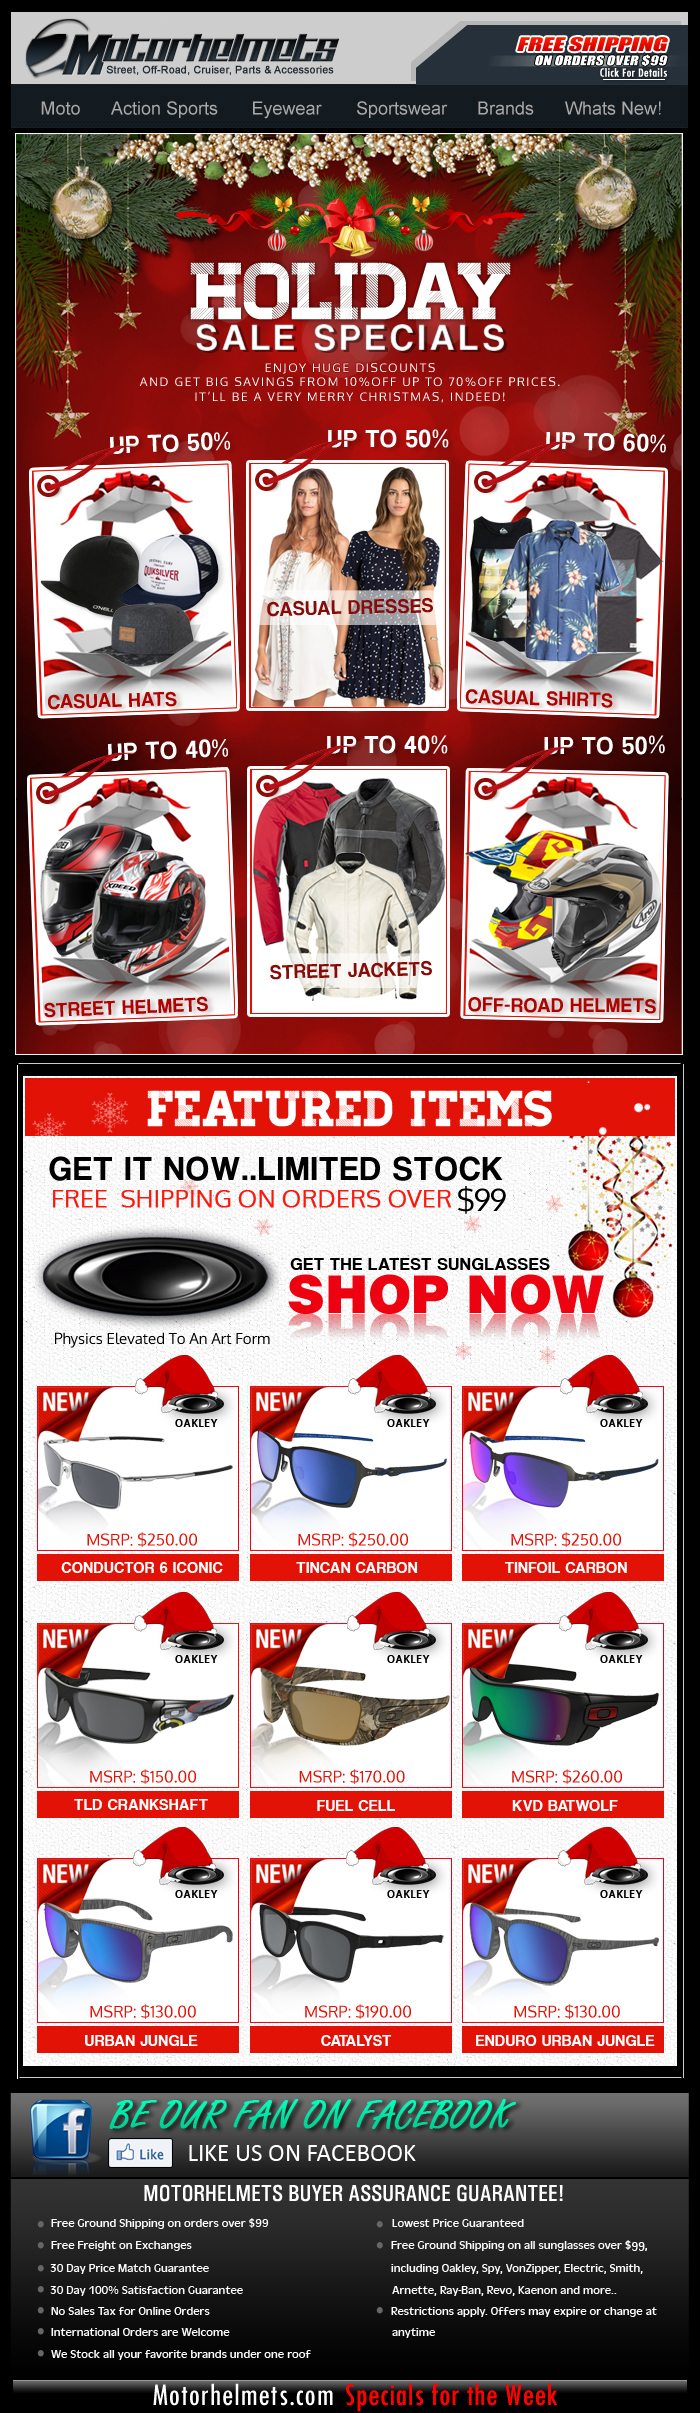 Cool Deals for cool season! Holiday Season Specials now available!